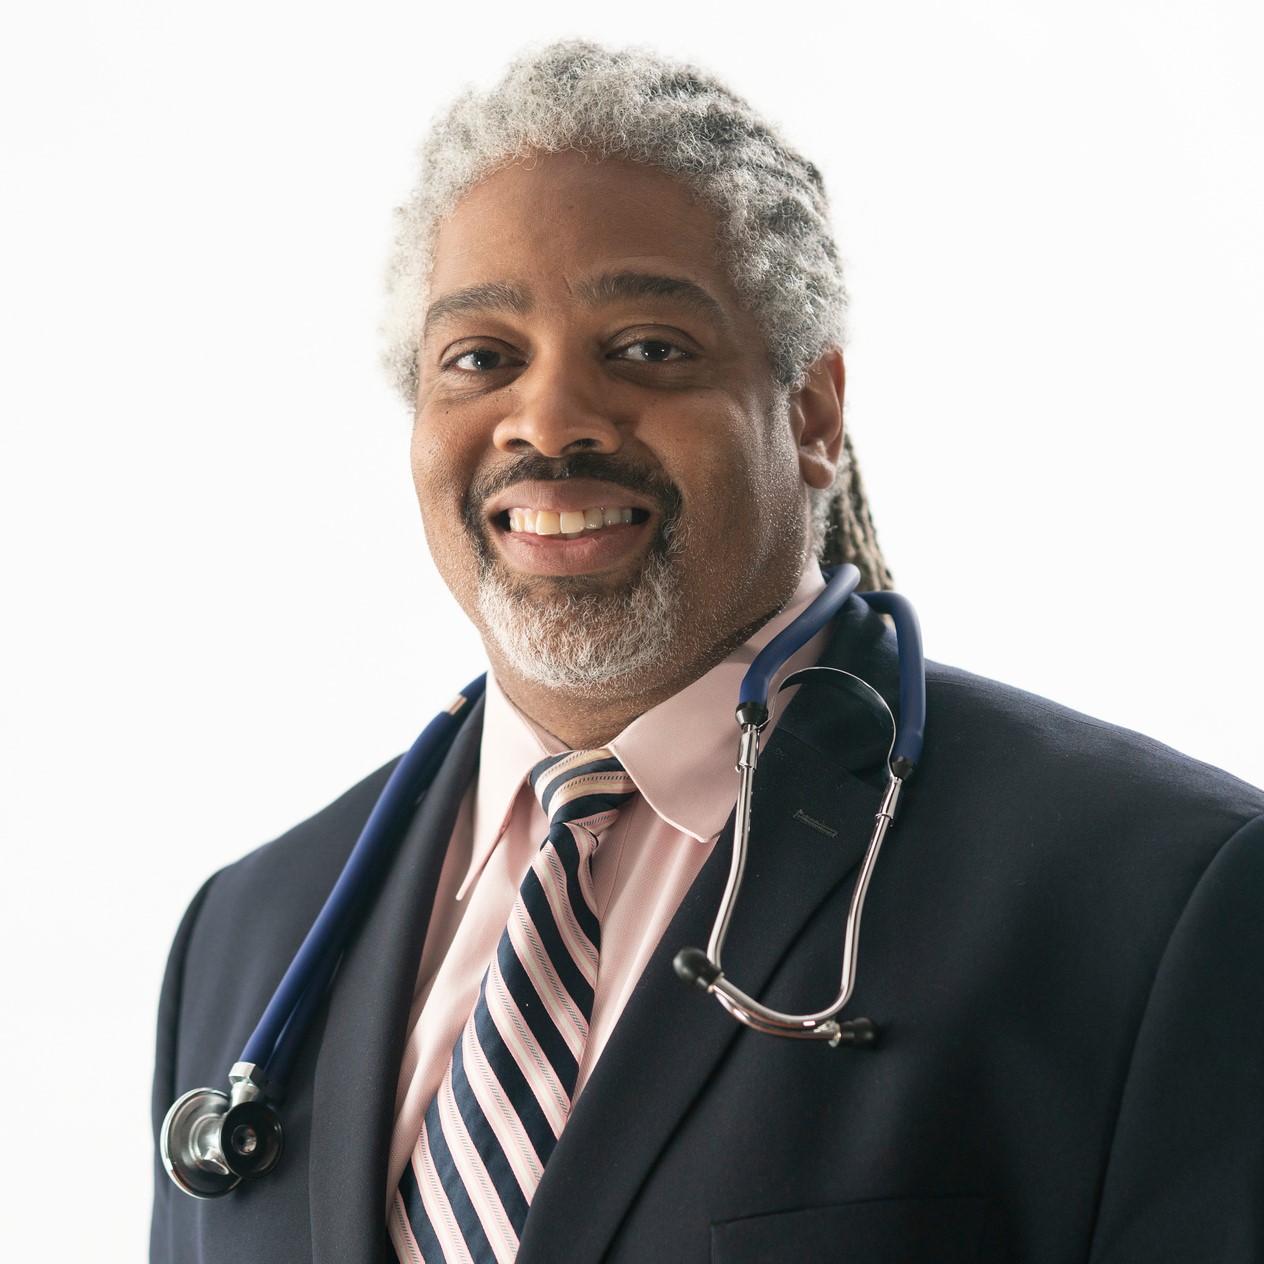 Dr. H. Steven Sims, Director and Laryngologist at CIVC